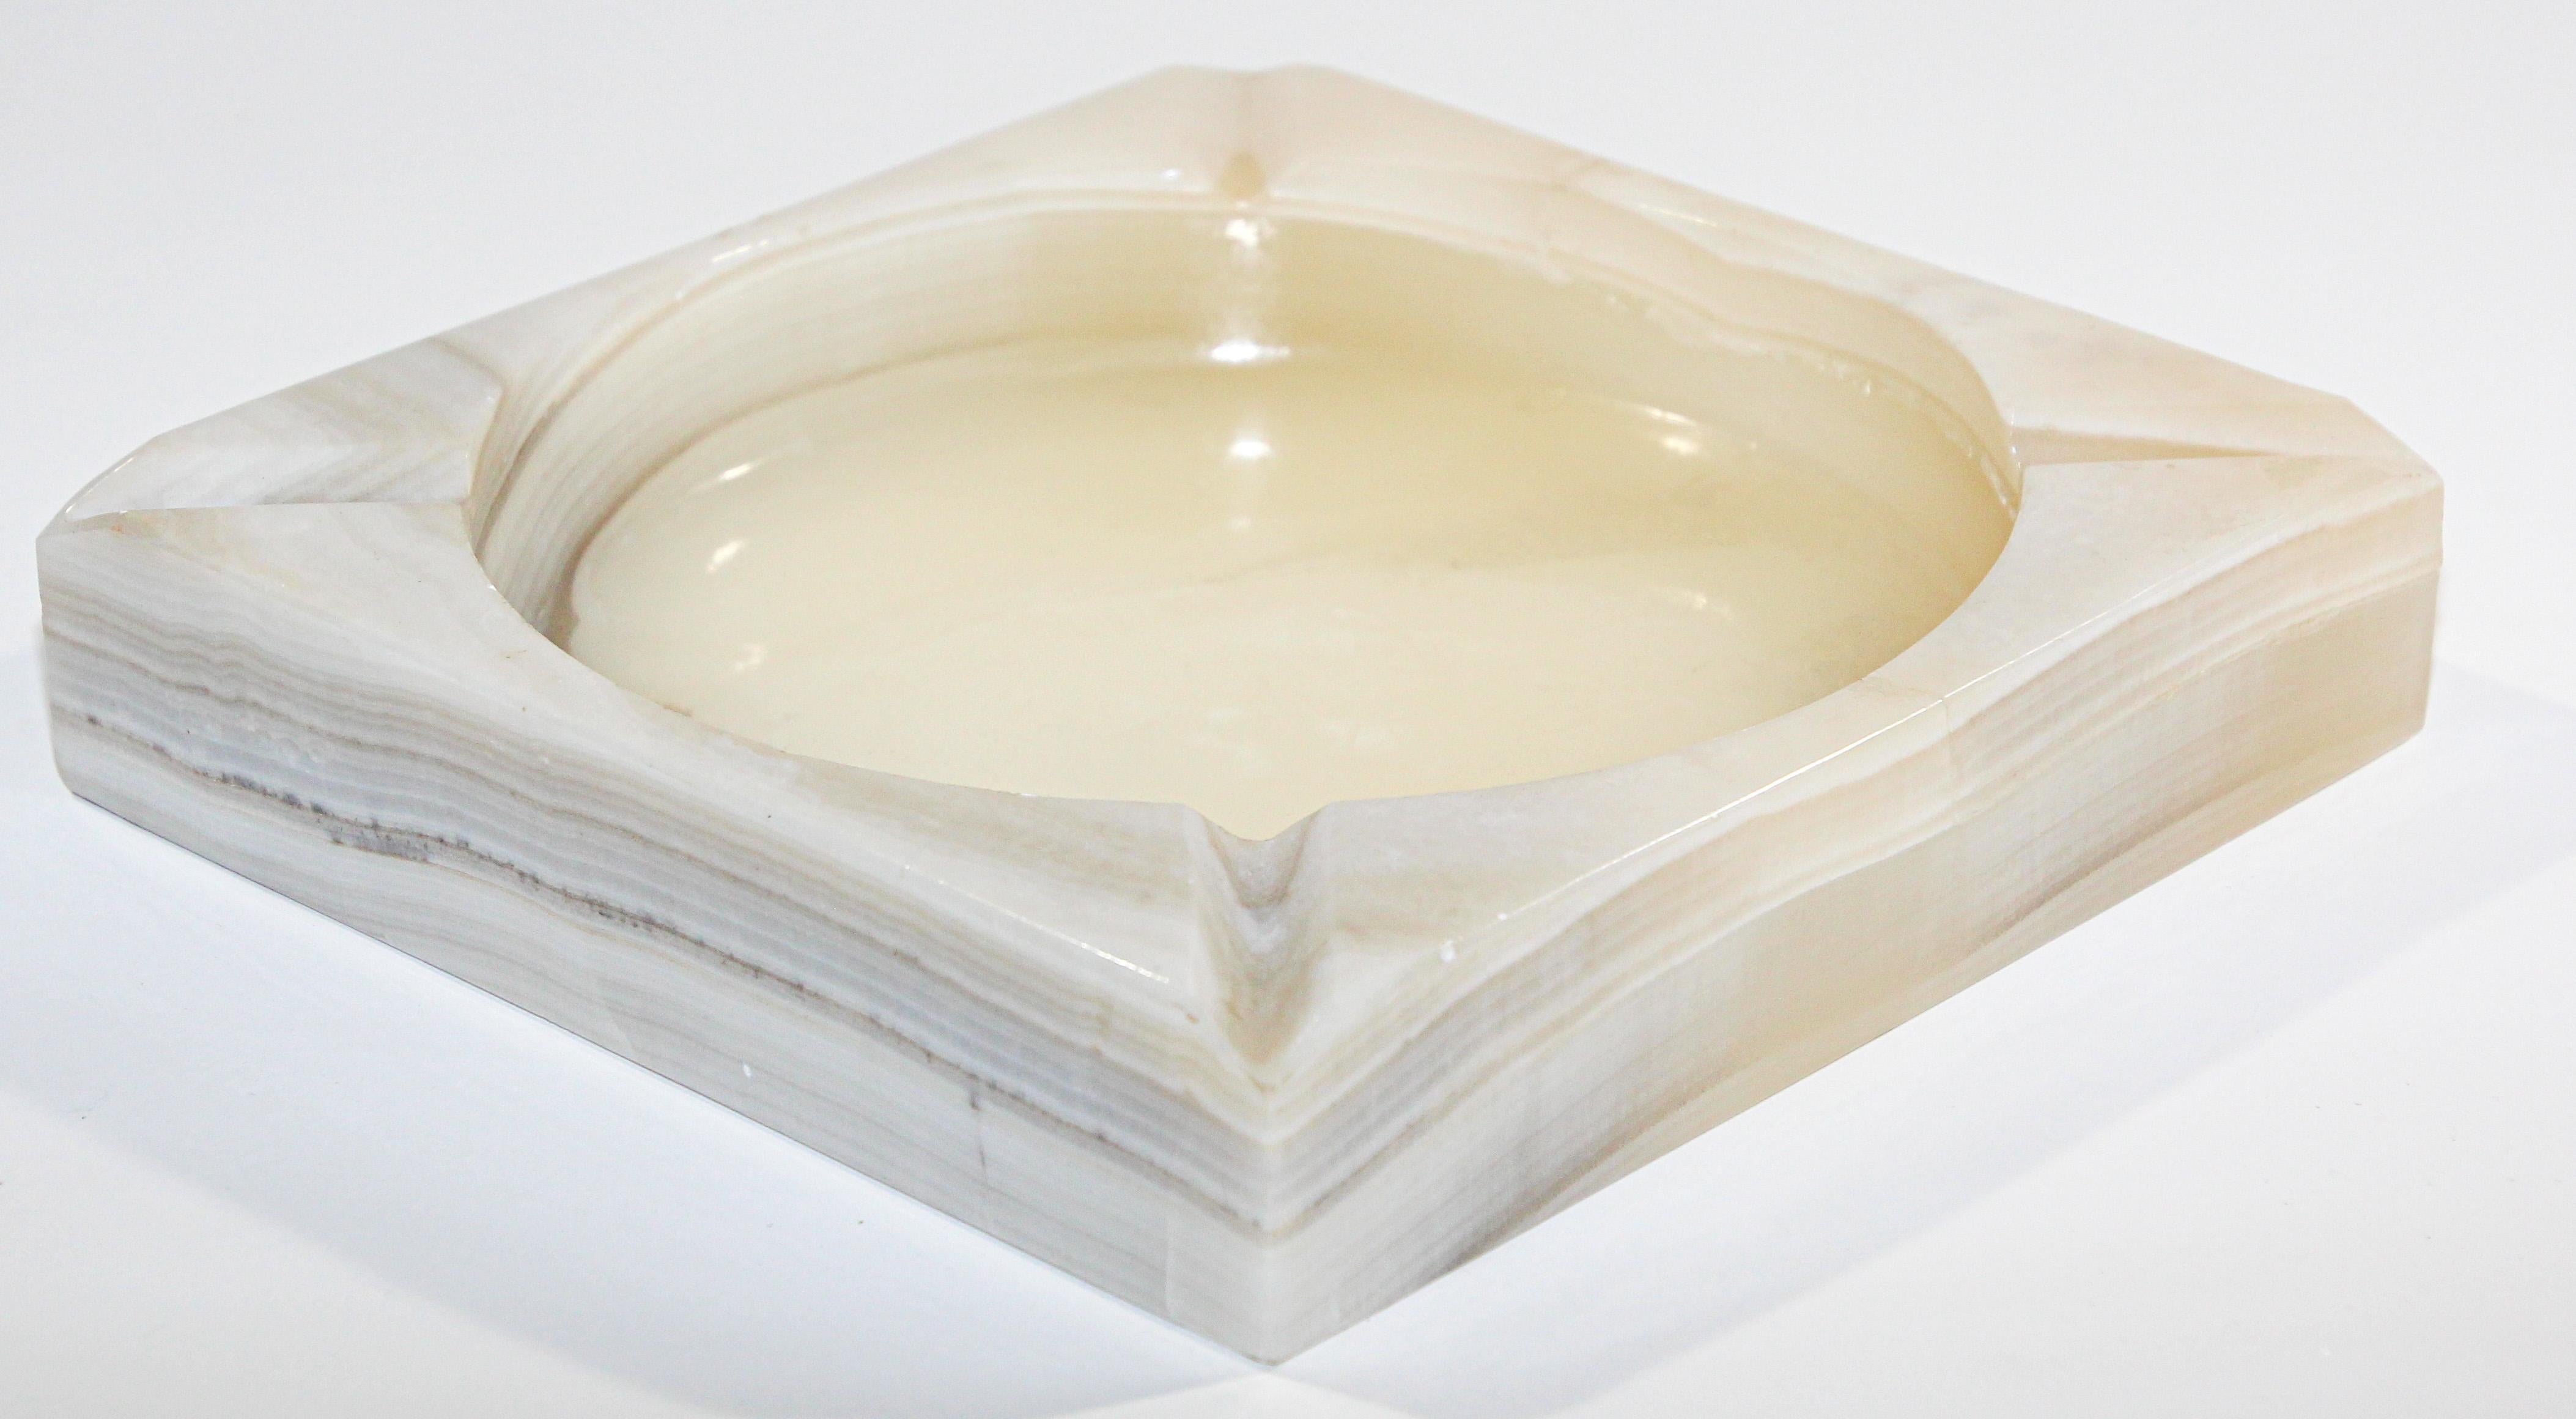 Large vintage Polished Alabaster square ashtray with a low profile and wide bowl. 
Vintage beige stone large ashtray with brown and grey color accents.
Mid-20th century stylish post modern heavy marble alabaster stone ashtray.
Beautiful vintage